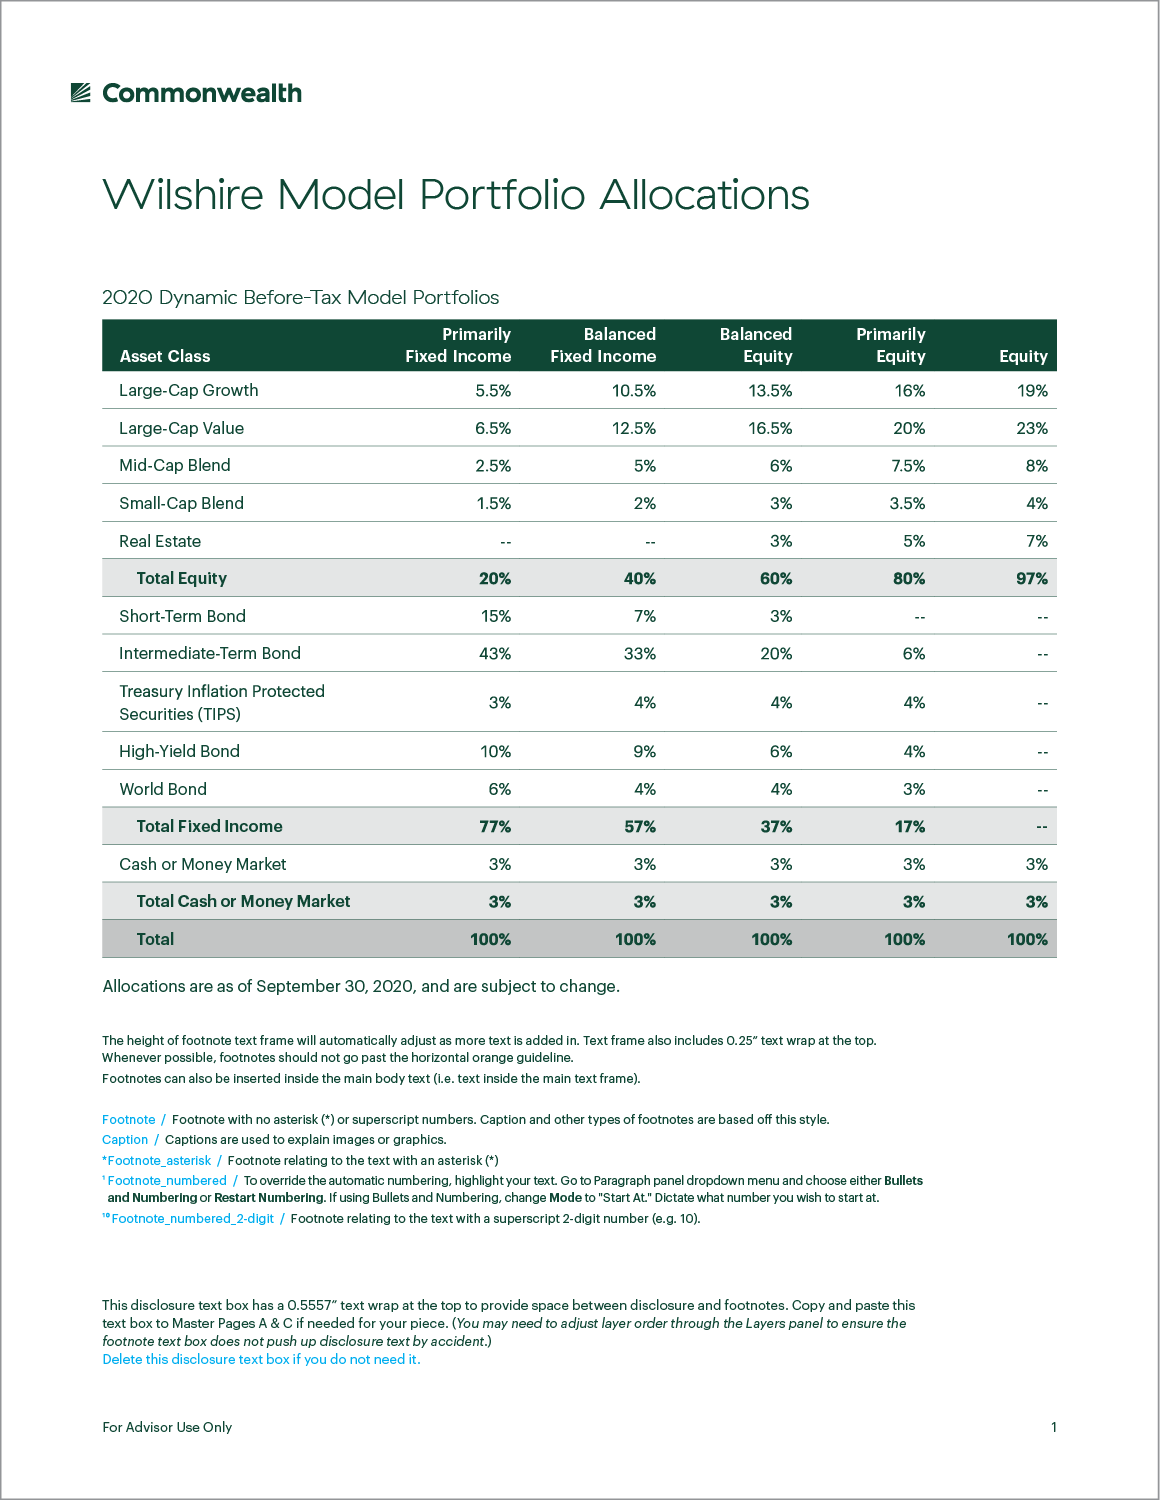 One of the pages from Asset Portfolio Table subtemplate